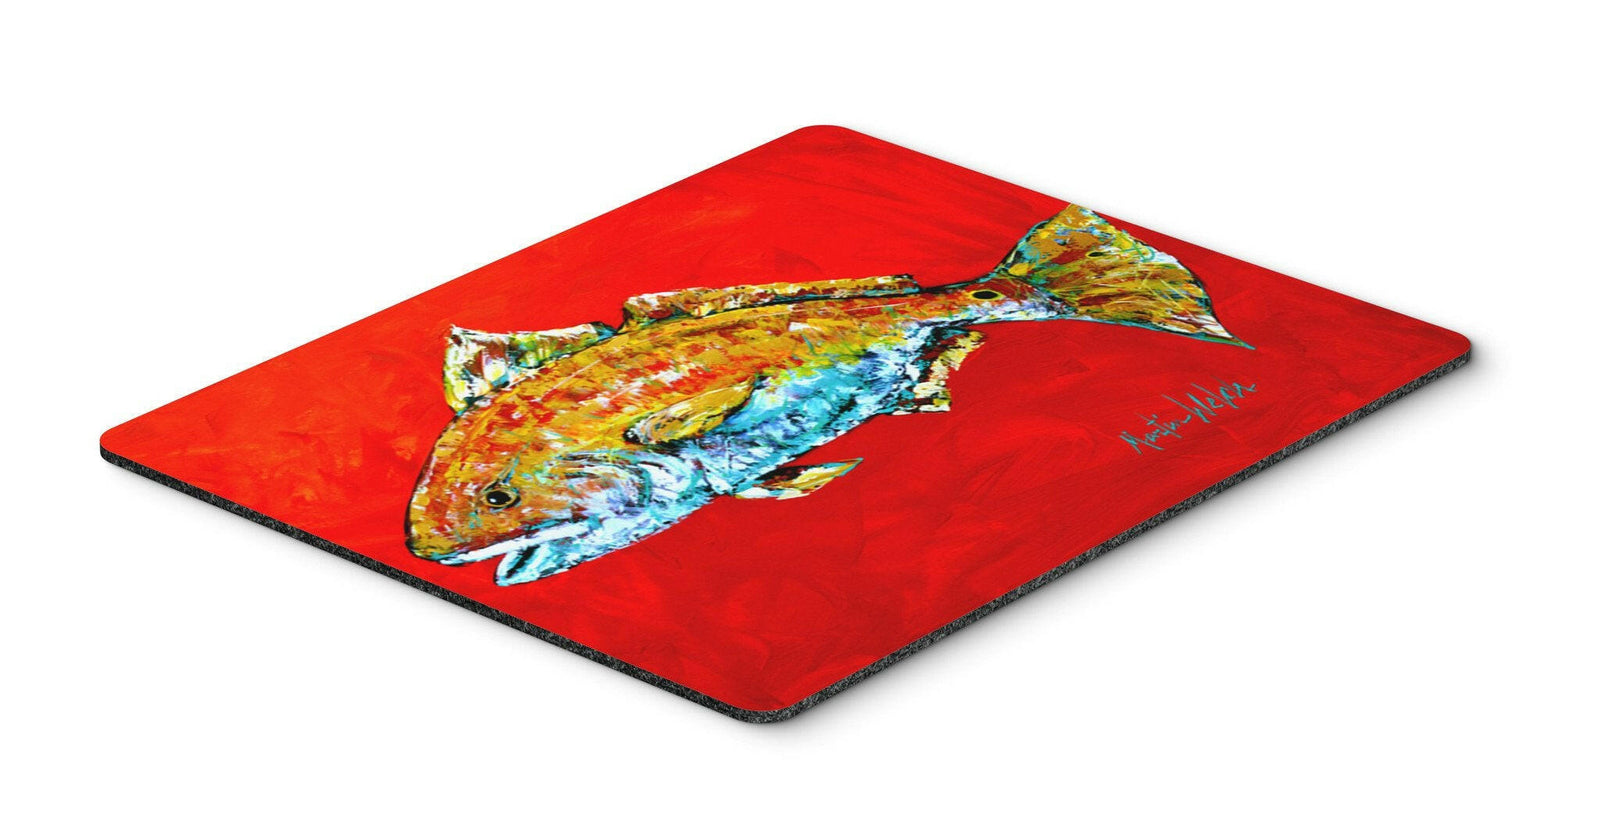 Fish - Red Fish Red Head Mouse Pad, Hot Pad or Trivet by Caroline's Treasures